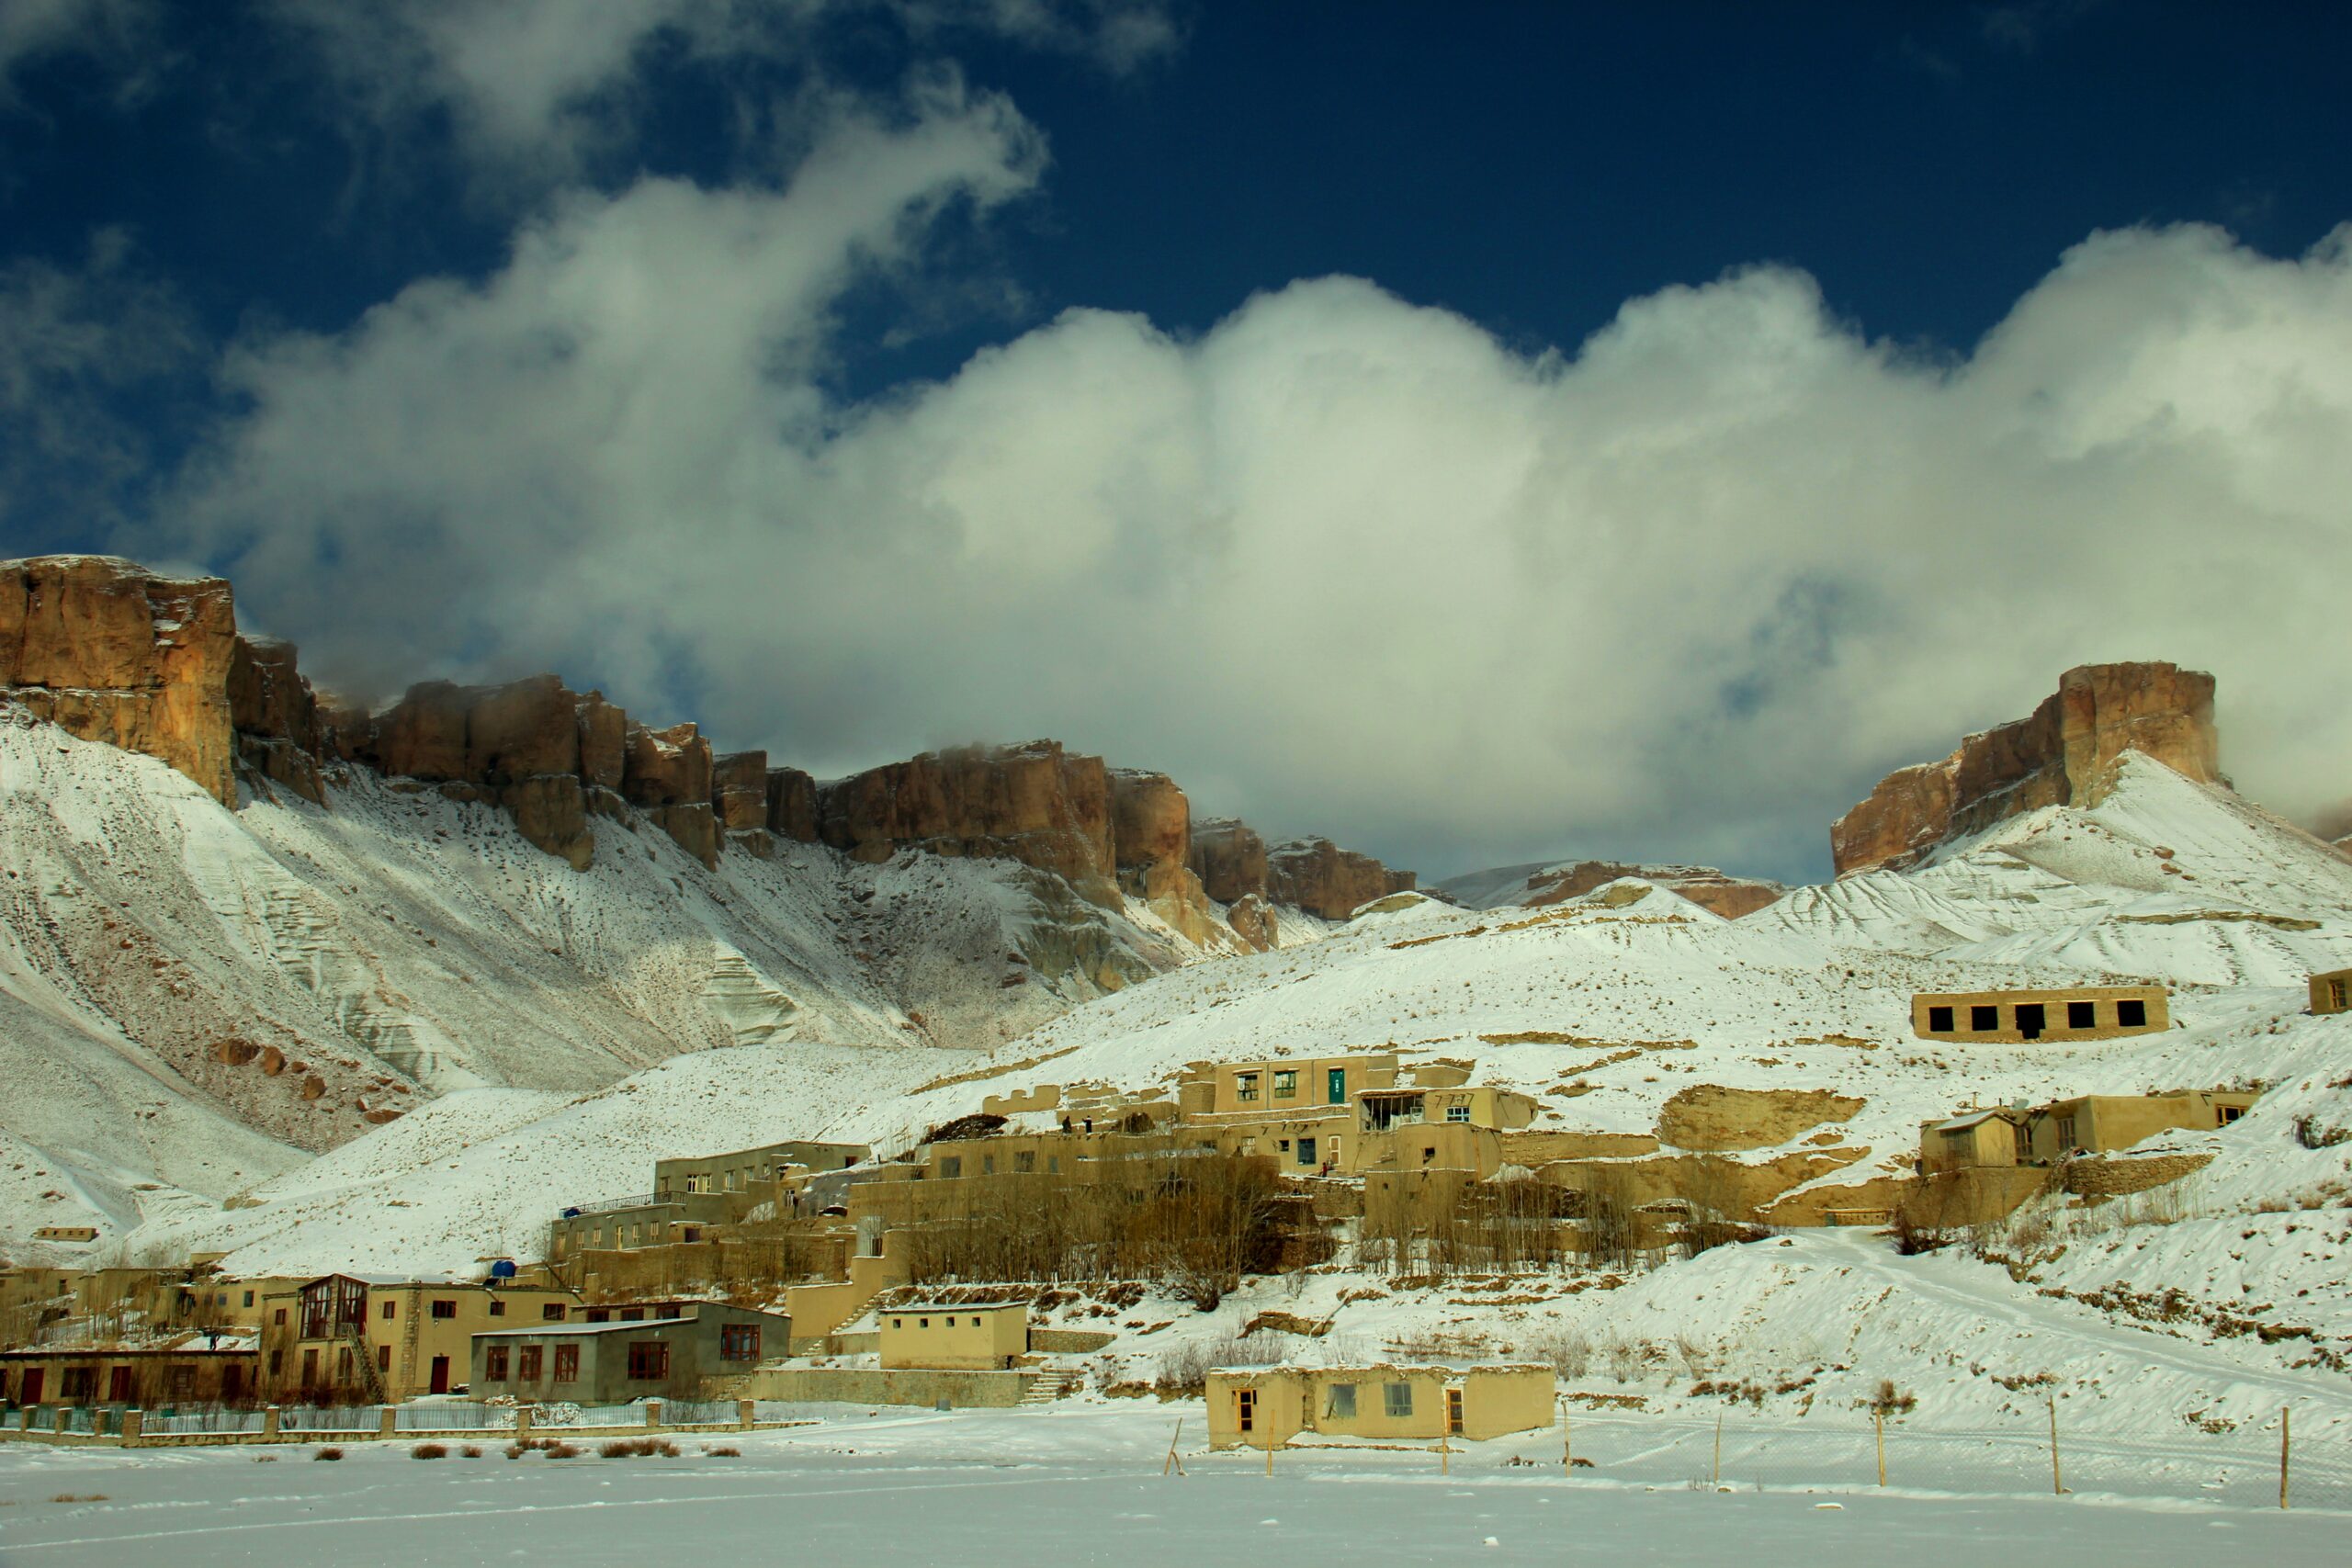 Photo of Sorobi Distrcit. Snow covers most of the small buildings. A huge cloud sits in the sky.